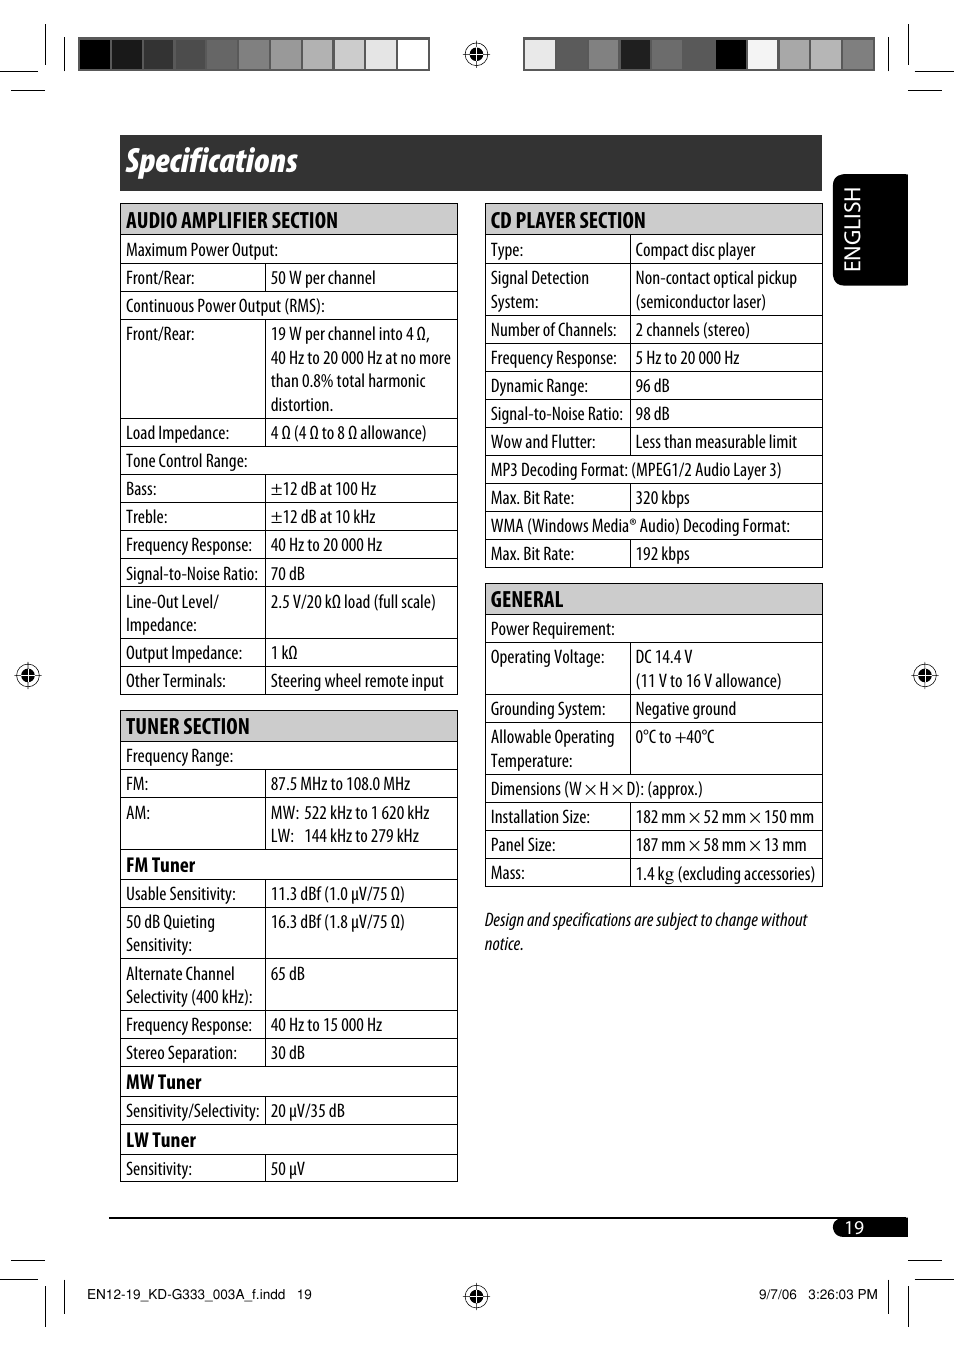 Specifications, English, General | JVC KD-G331 User Manual | Page 19 / 20